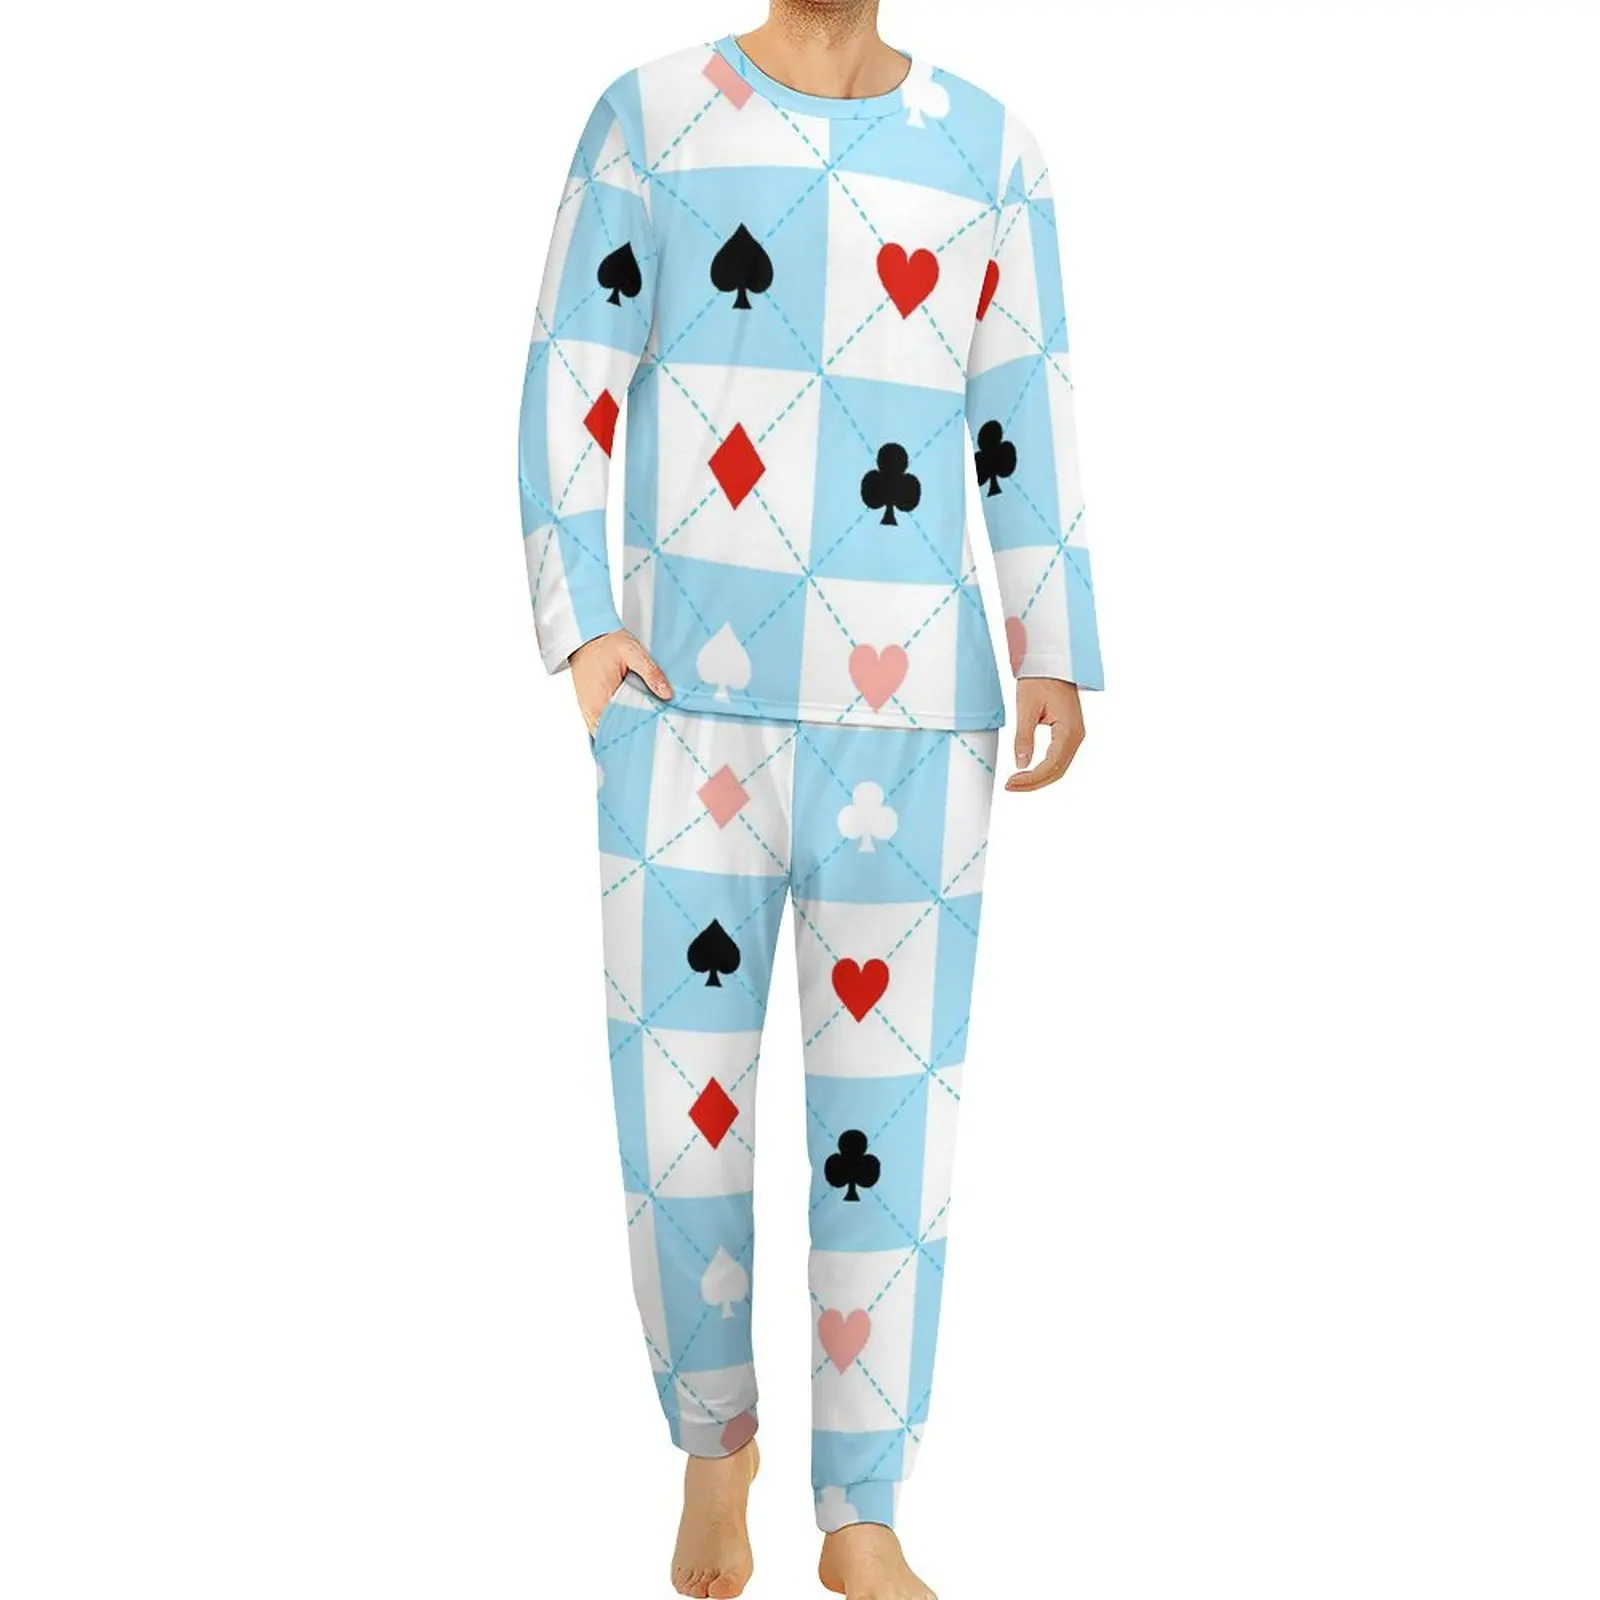 heart-poker-pajamas-daily-two-piece-blue-and-white-plaid-lovely-pajama-sets-men-long-sleeve-home-graphic-sleepwear-large-size